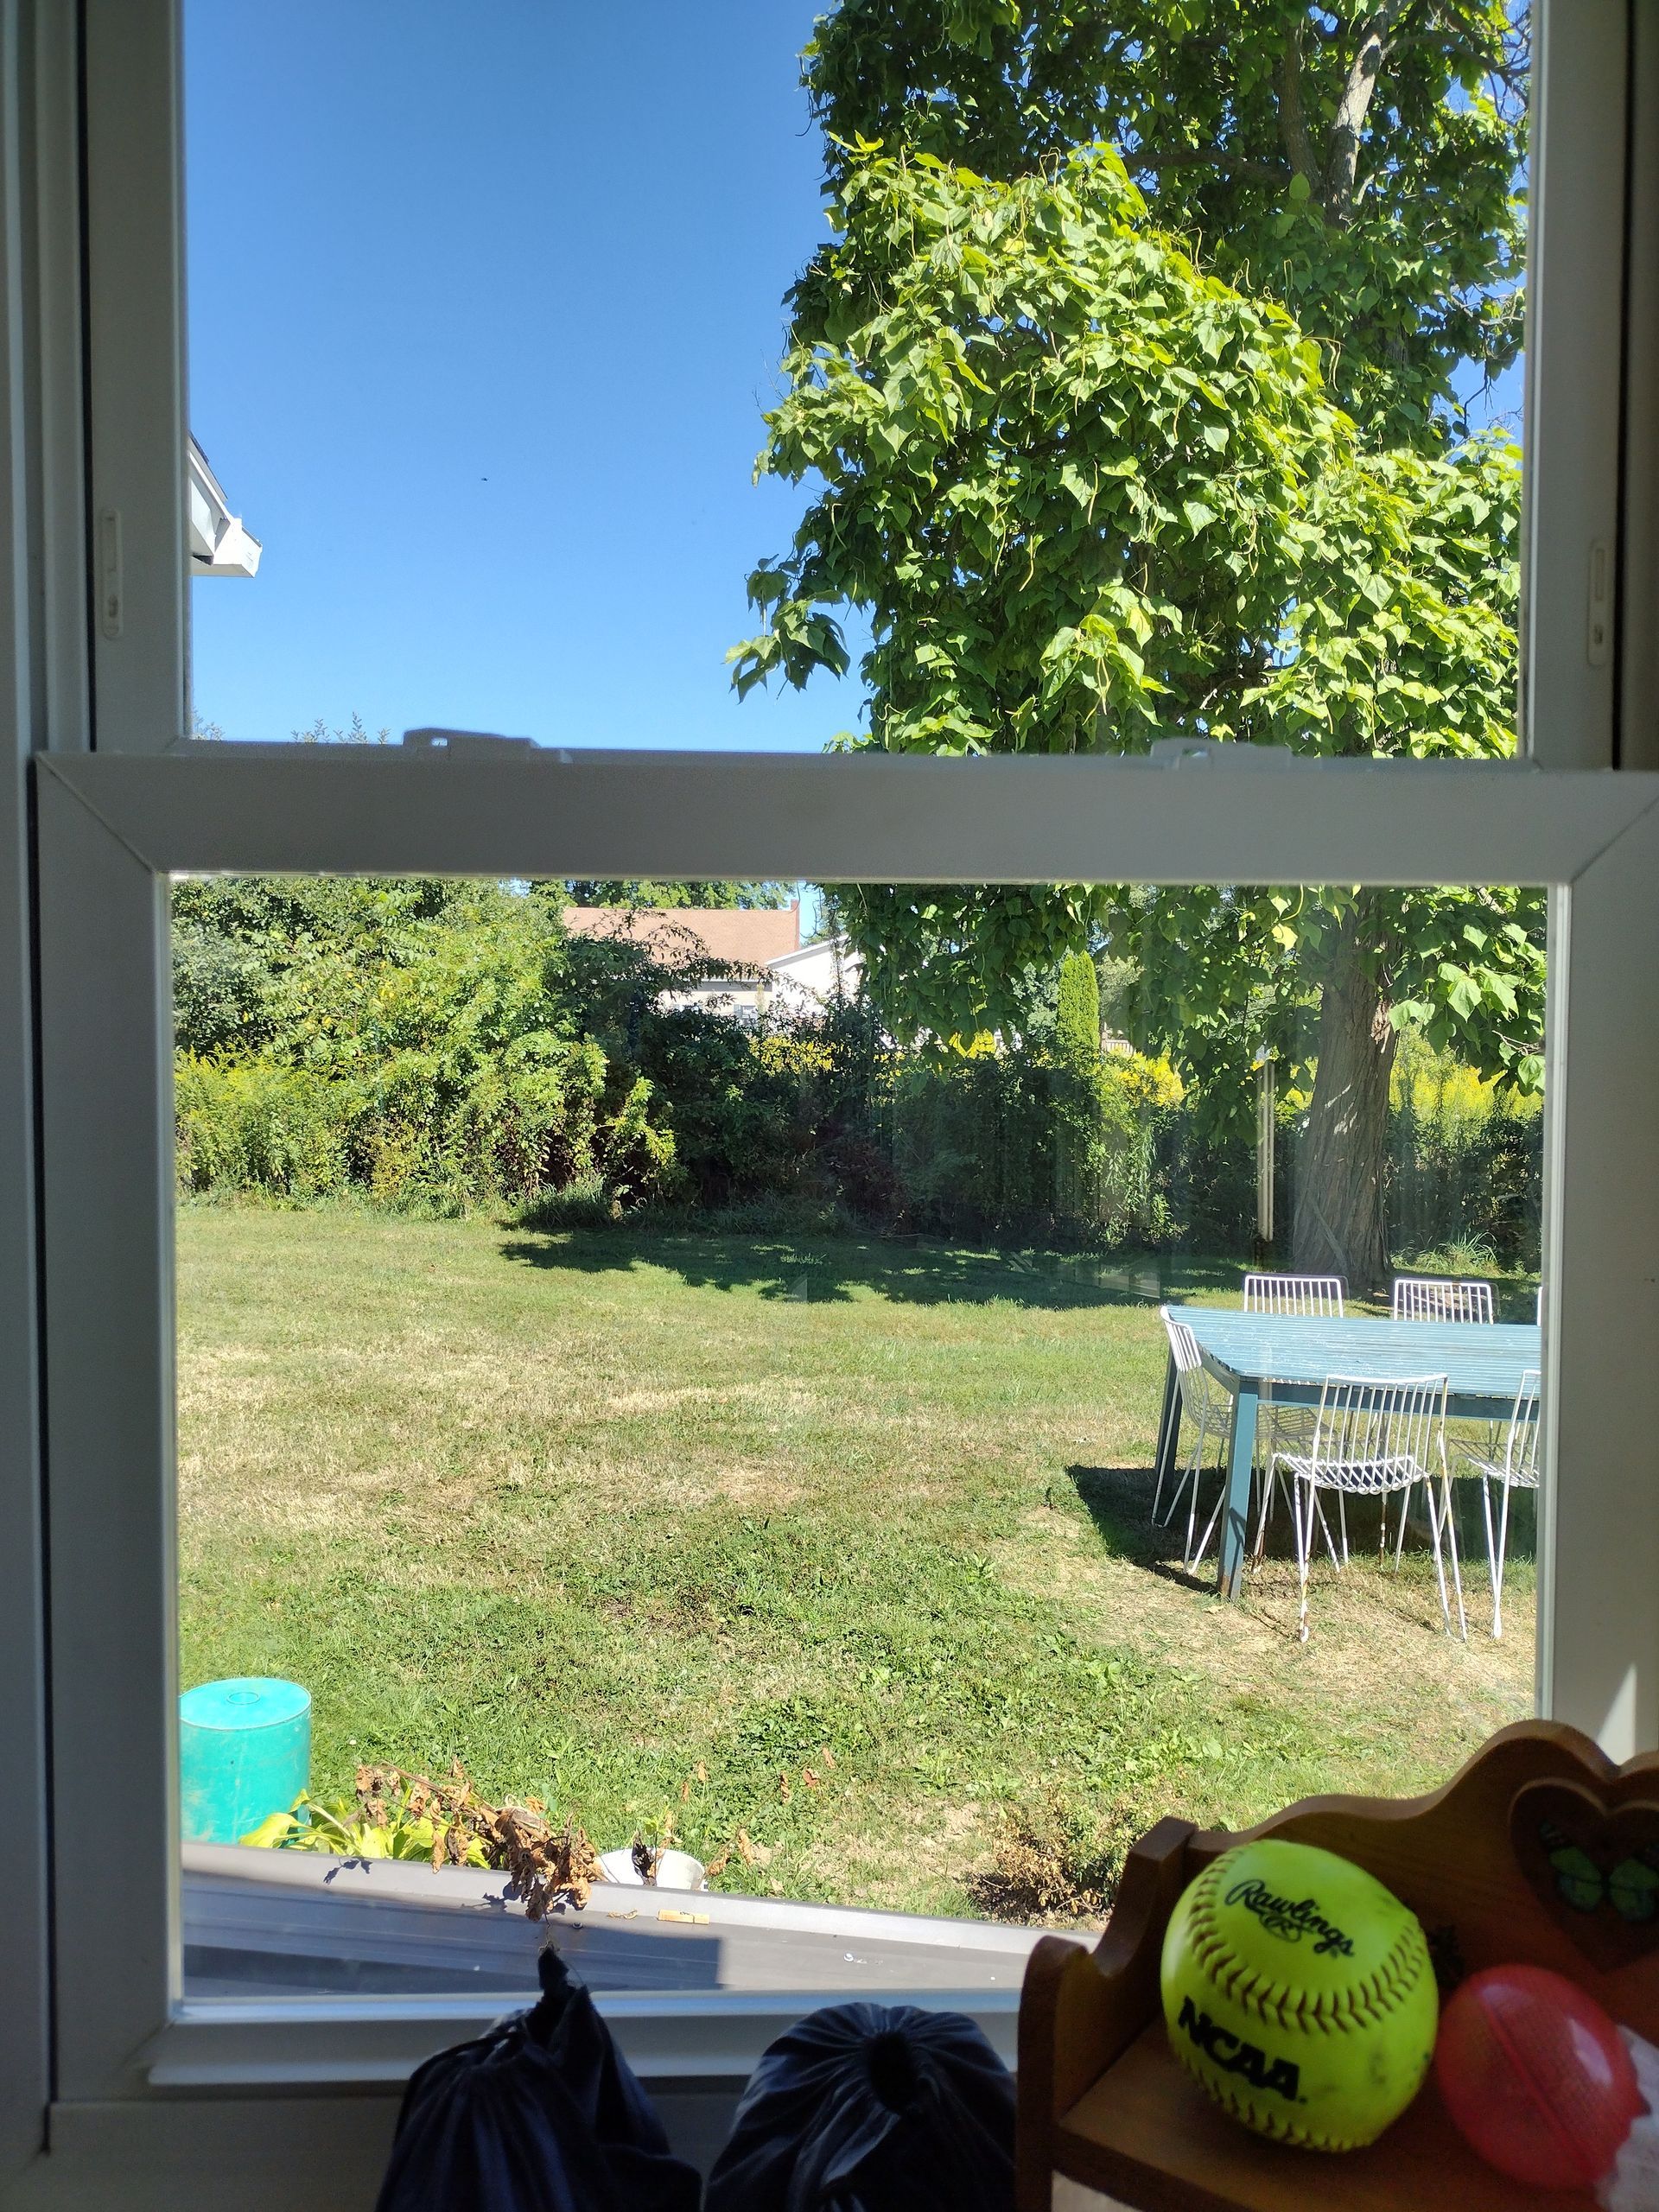 A view of a yard through a window with a tennis ball on a table.